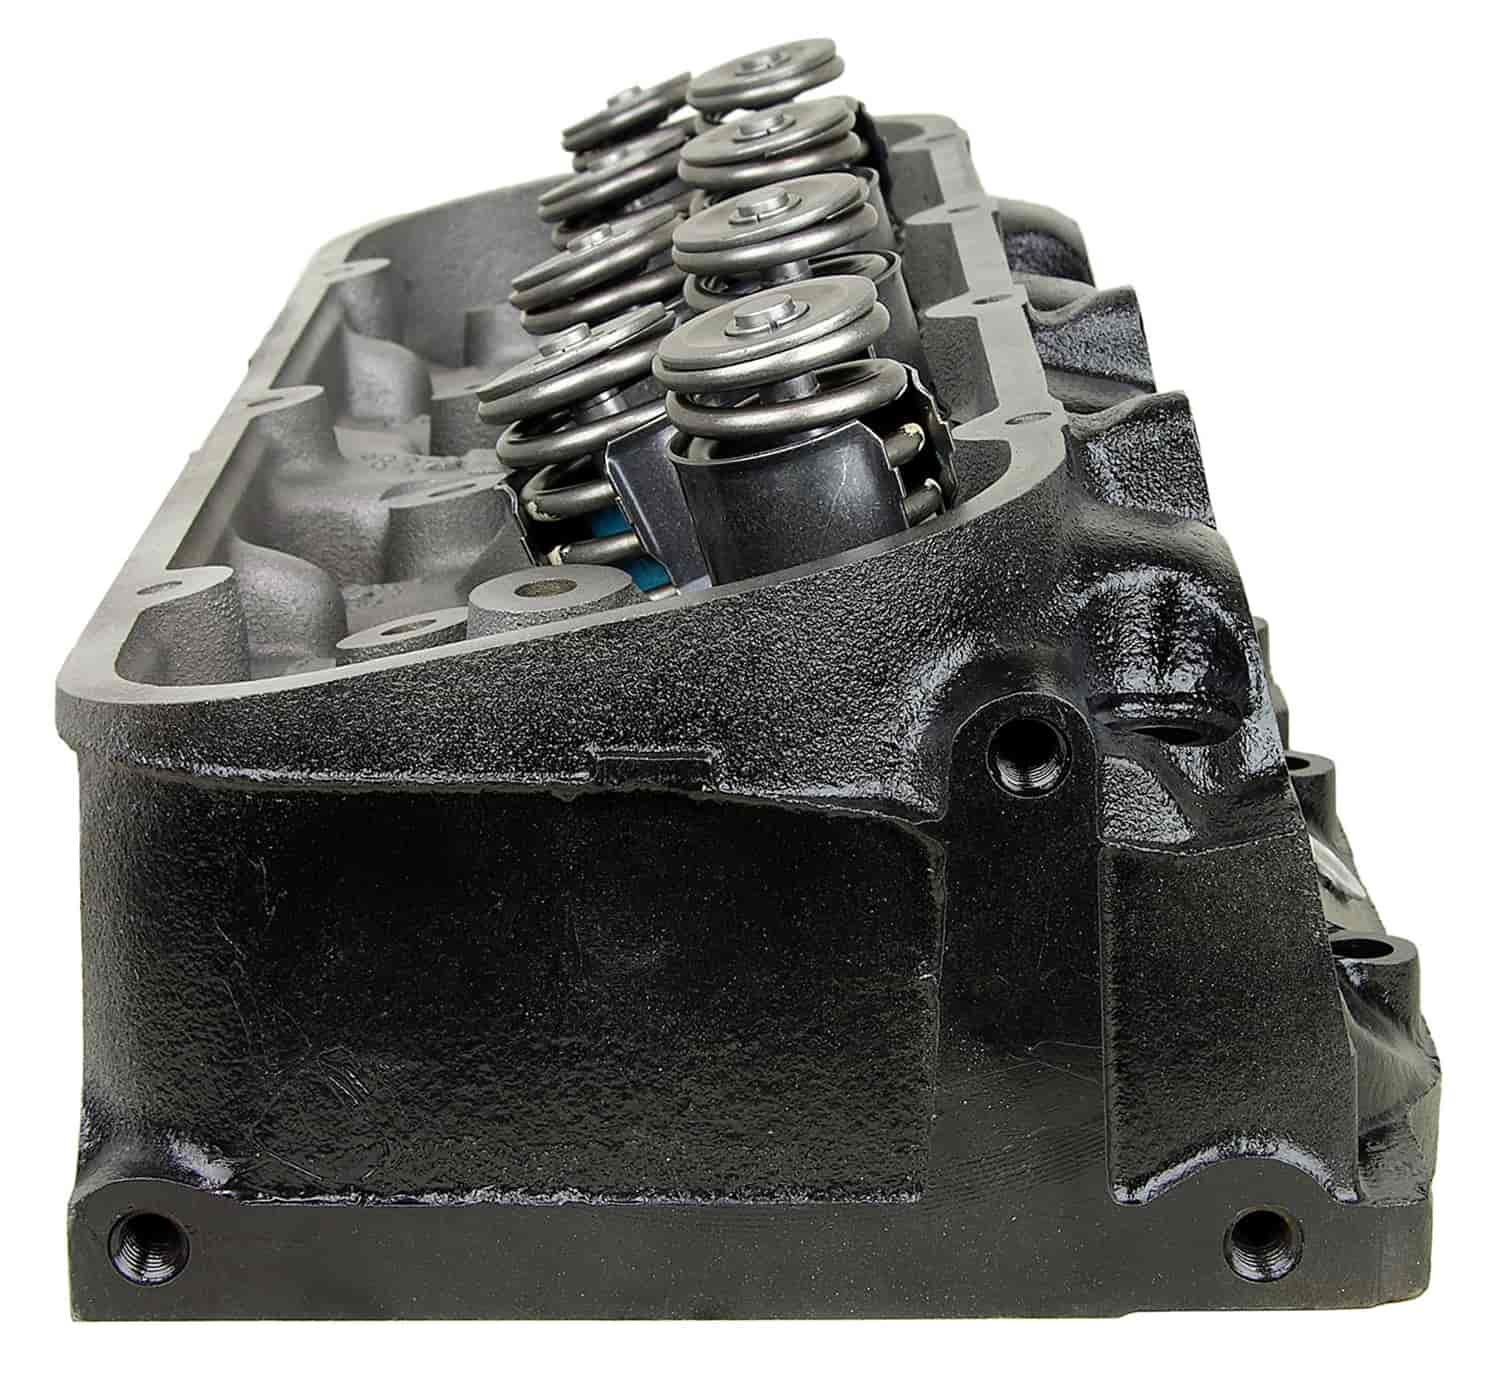 Remanufactured Cylinder Head for 1991-1998 Chevy/GMC Medium Duty Truck with 366ci/6.0L & 427ci/7.0L V8